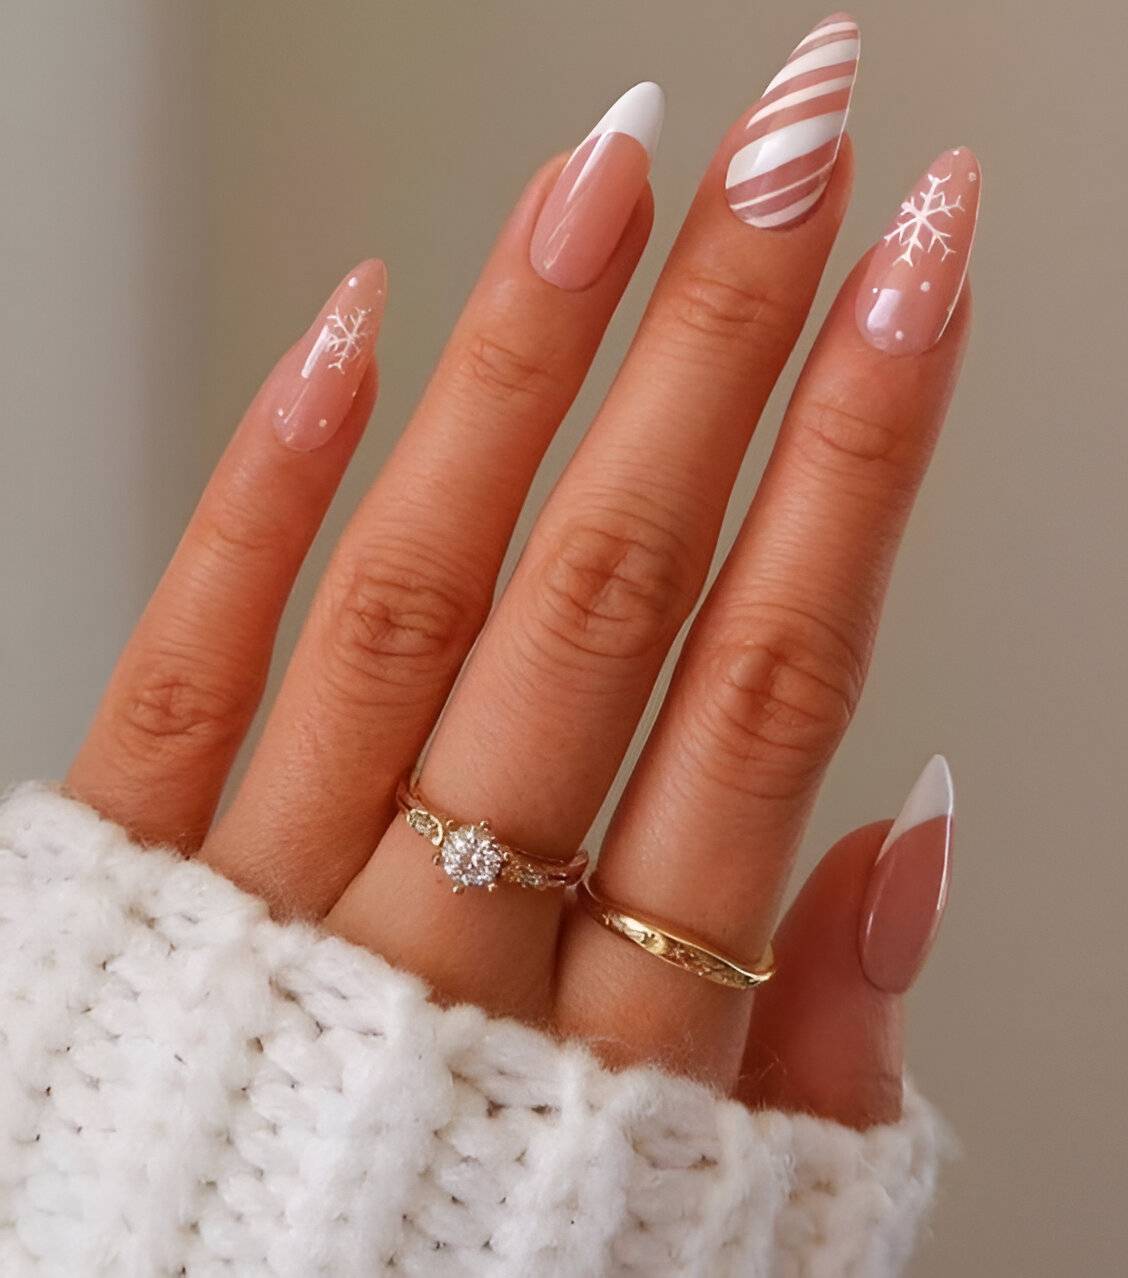 White And Nude Christmas Nails